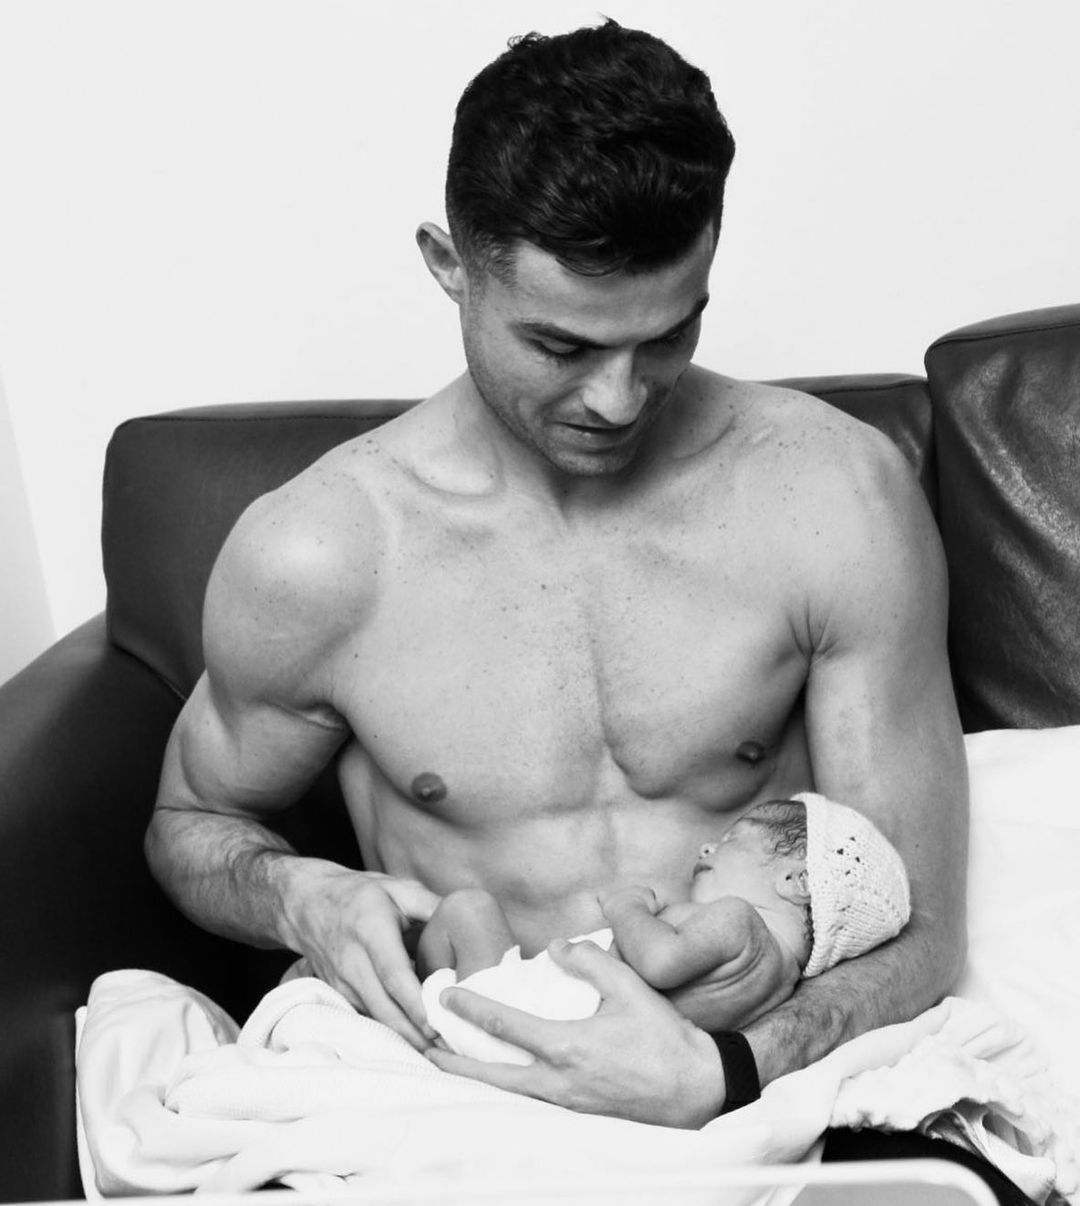 Cristiano Ronaldo posts adorable picture on Instagram welcoming his baby girl